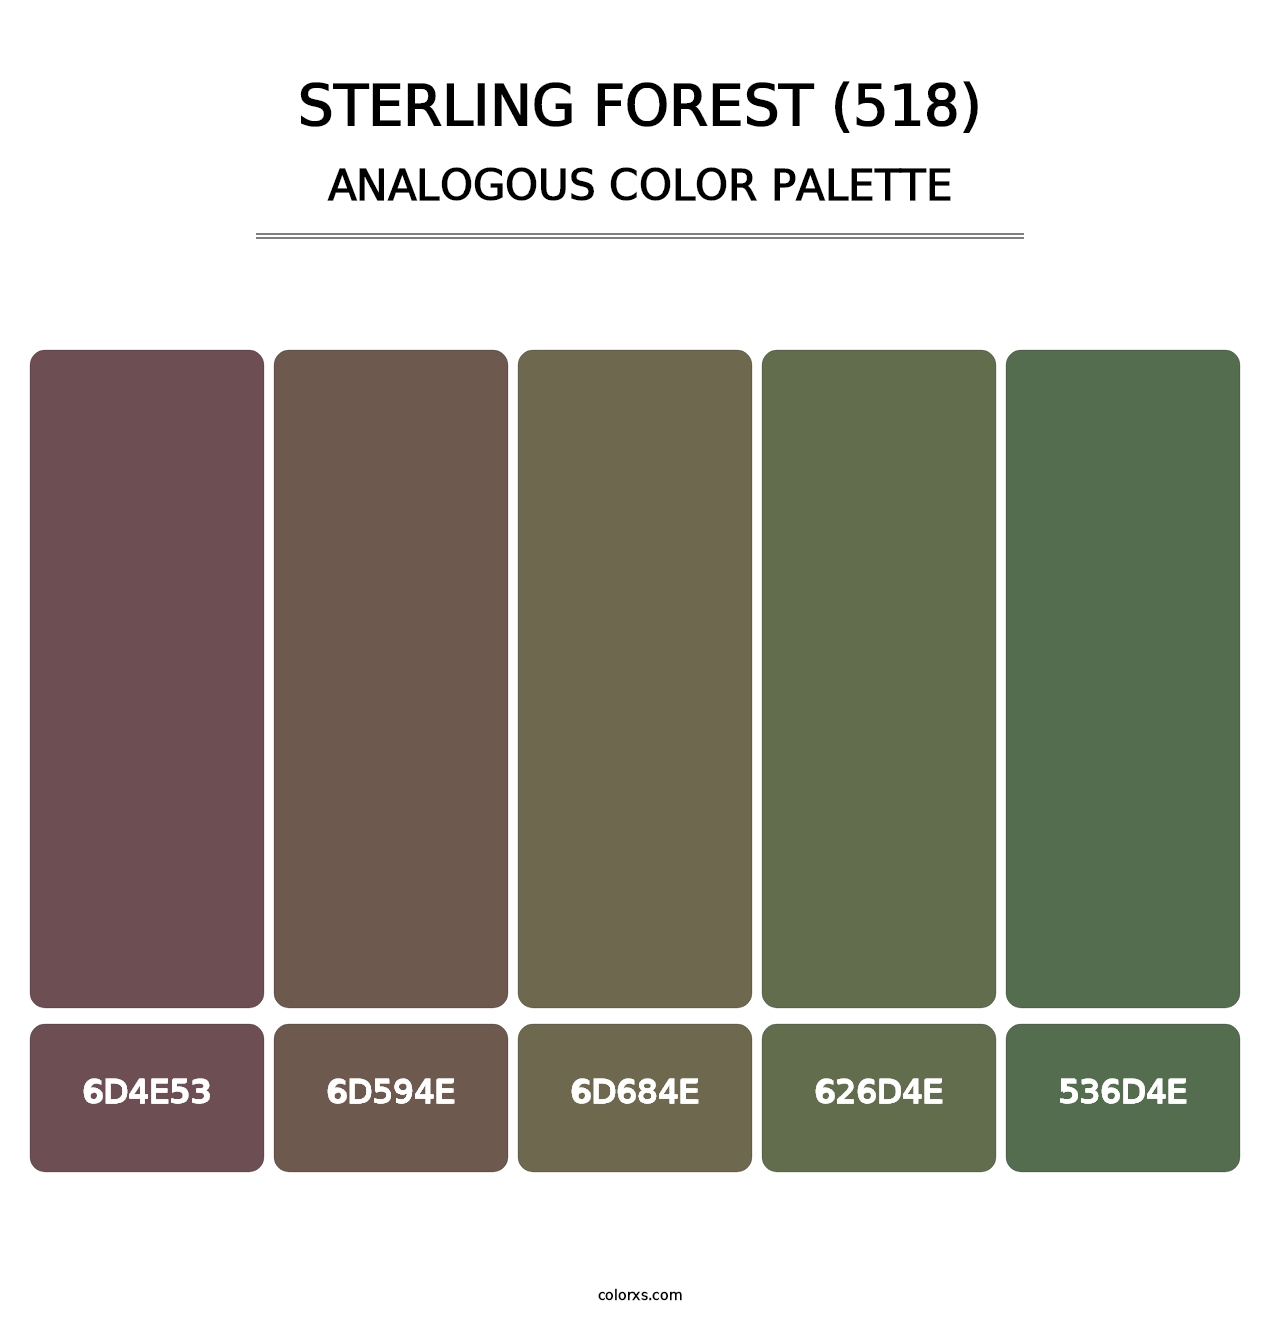 Sterling Forest (518) - Analogous Color Palette